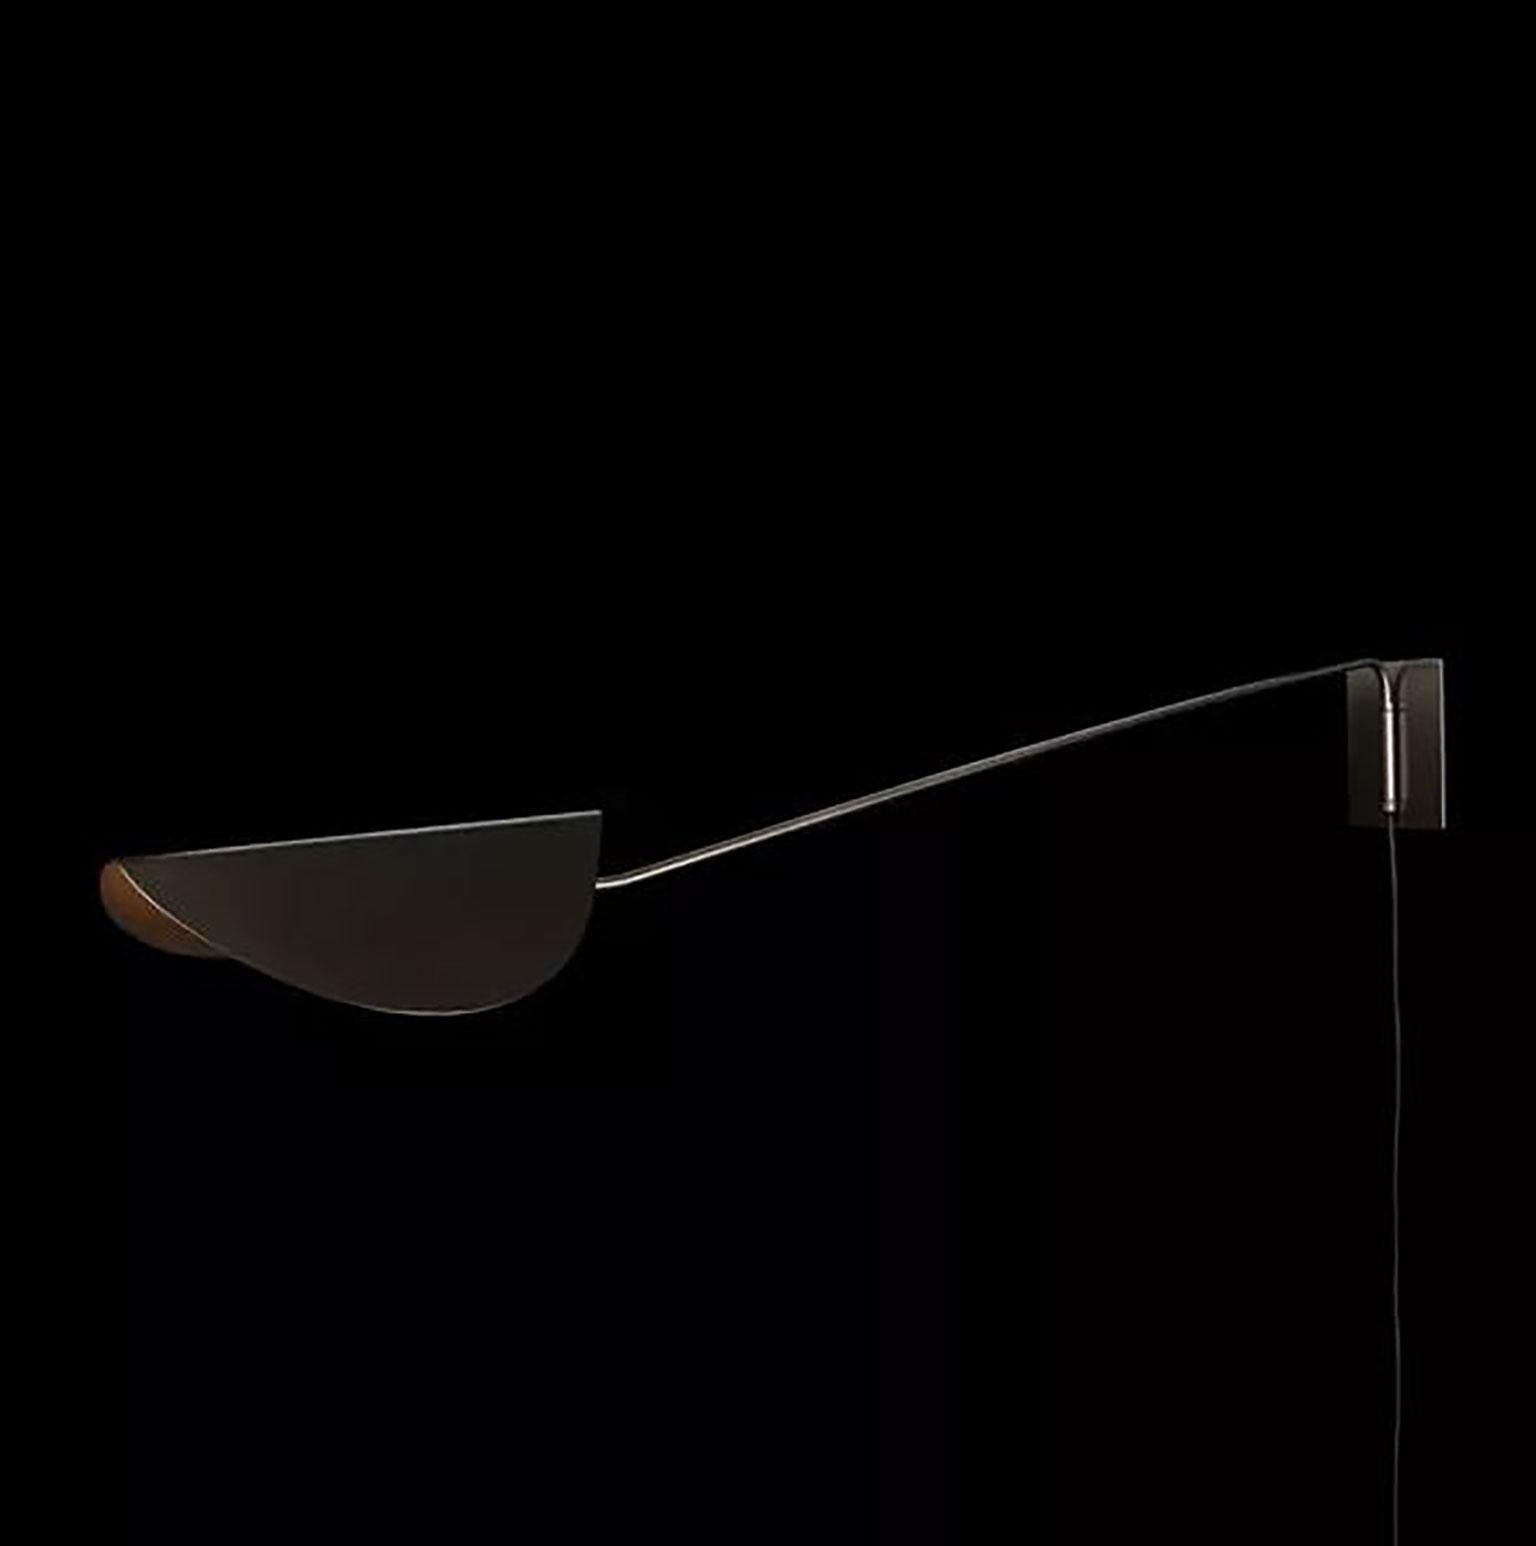 Plume Anodic Bronze Wall Lamp by Christophe Pillet for Oluce In New Condition For Sale In Brooklyn, NY